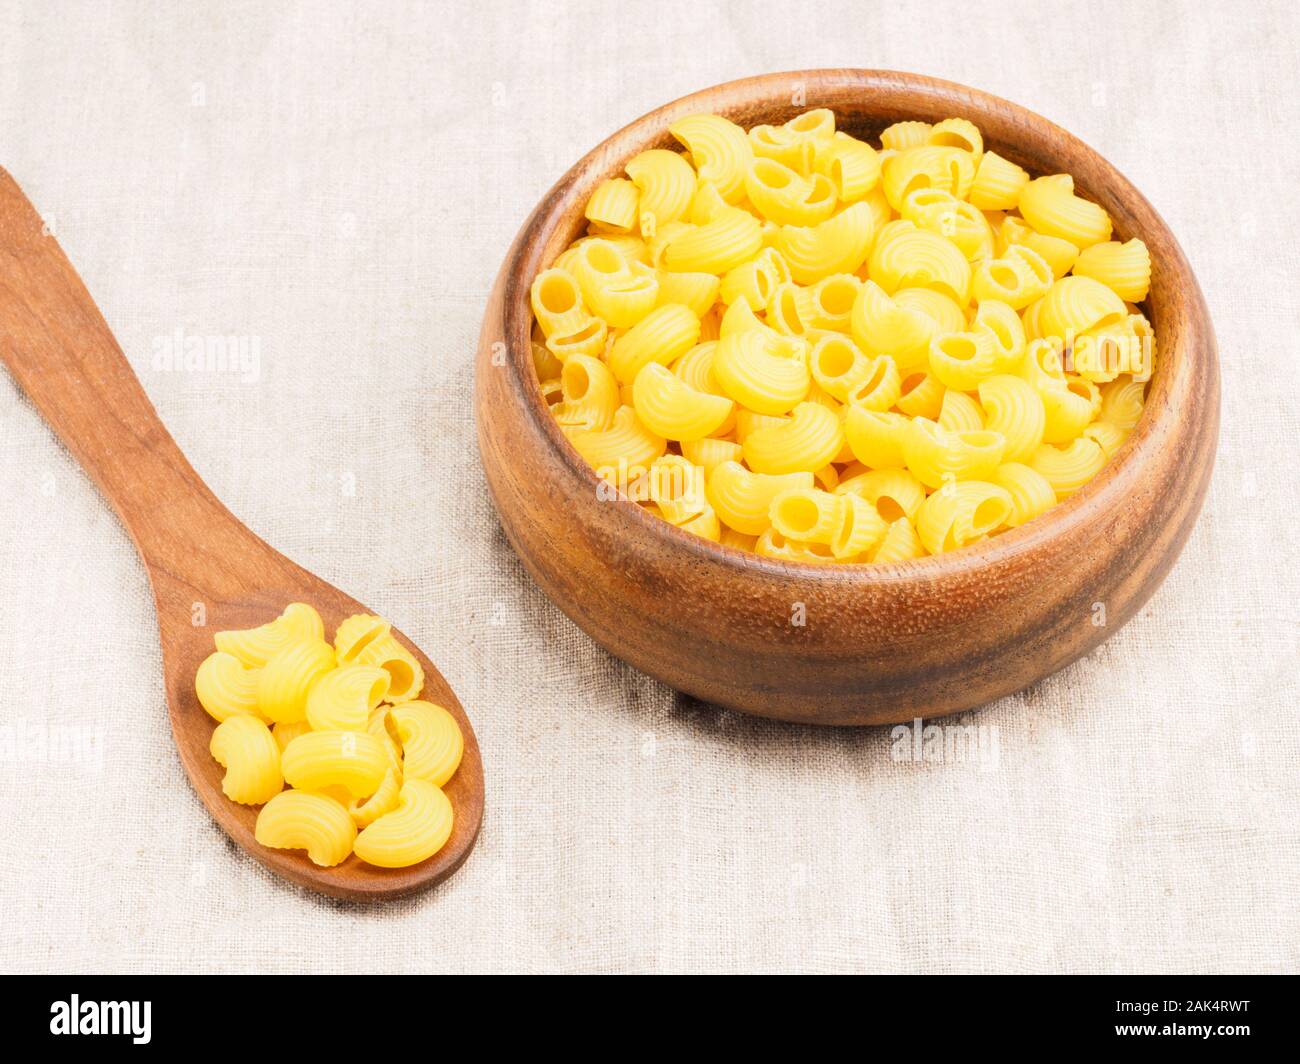 Pasta helices type in wooden bowl and spoon on a beige fabric background. Healthy eating concept Stock Photo